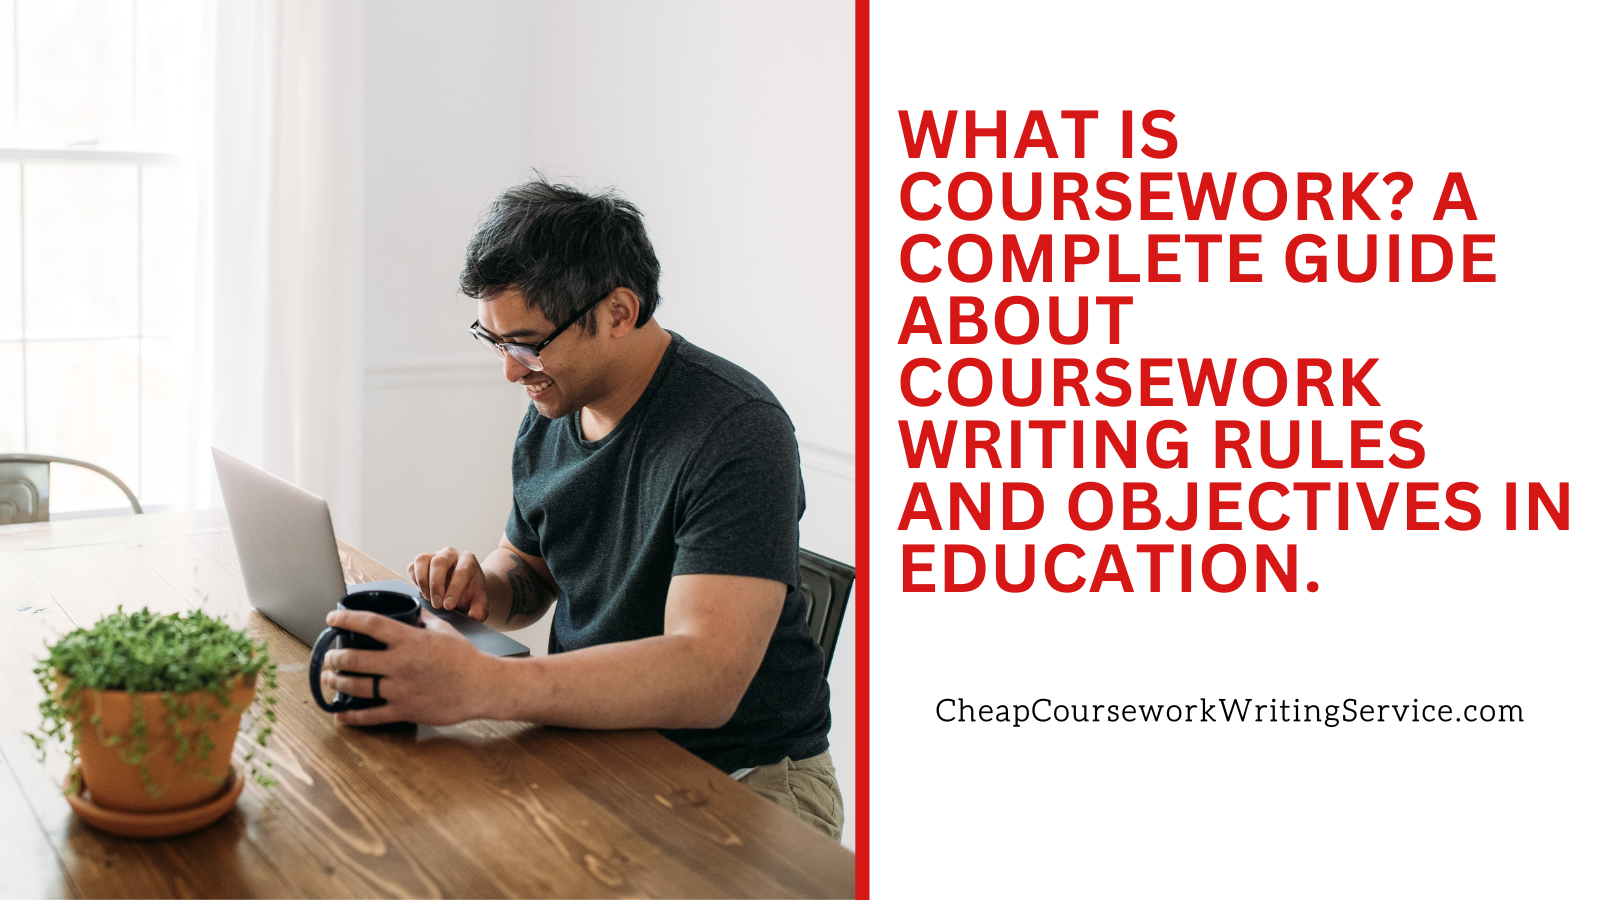 What is Coursework? A Complete Guide About Coursework Writing Rules and Objectives in Education